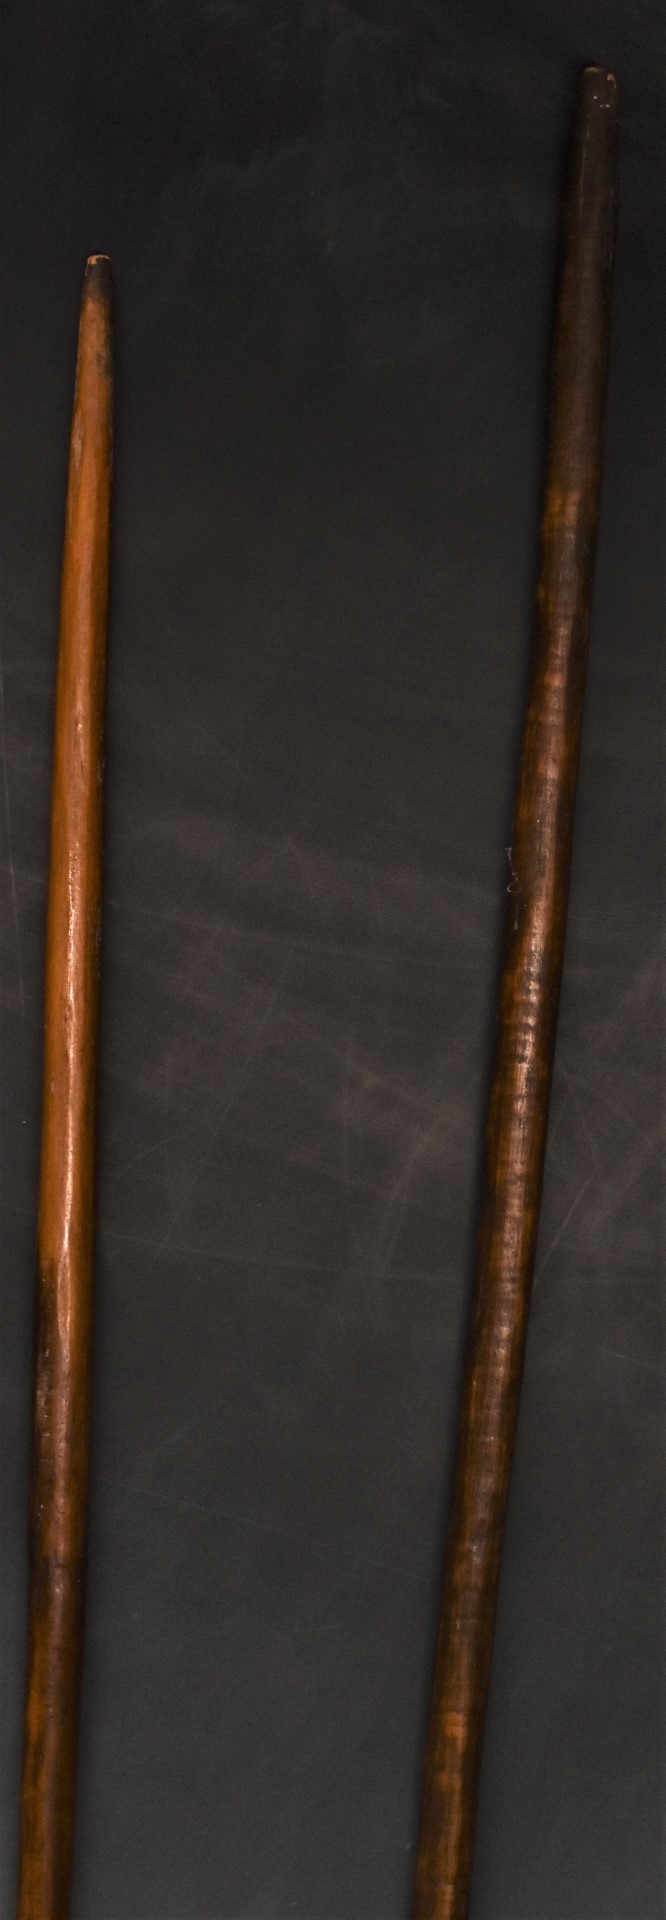 Two 19thC South African Zulu or similar spears with wire decoration. longest 143cm - Image 3 of 4